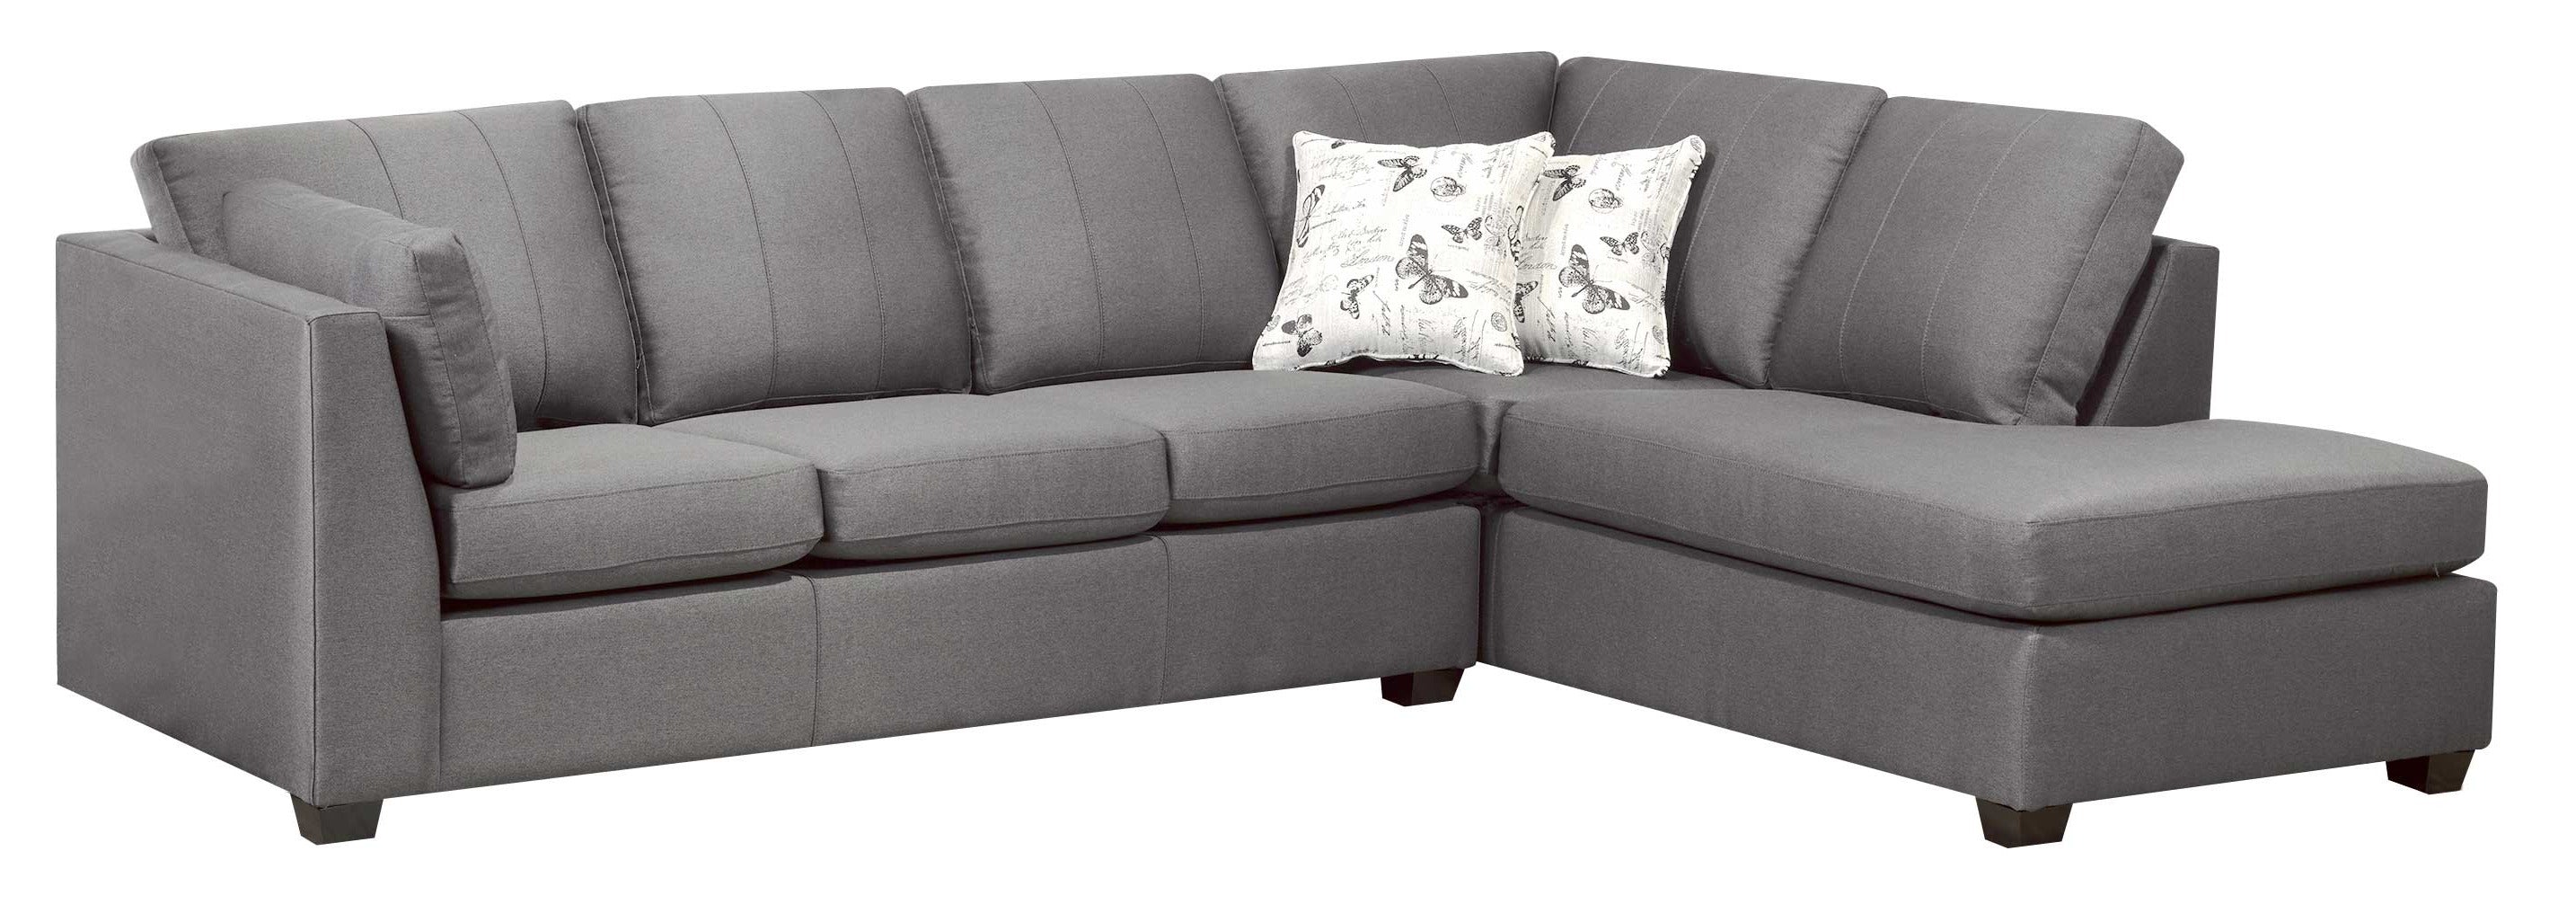 9830 sectional sofa right chaise